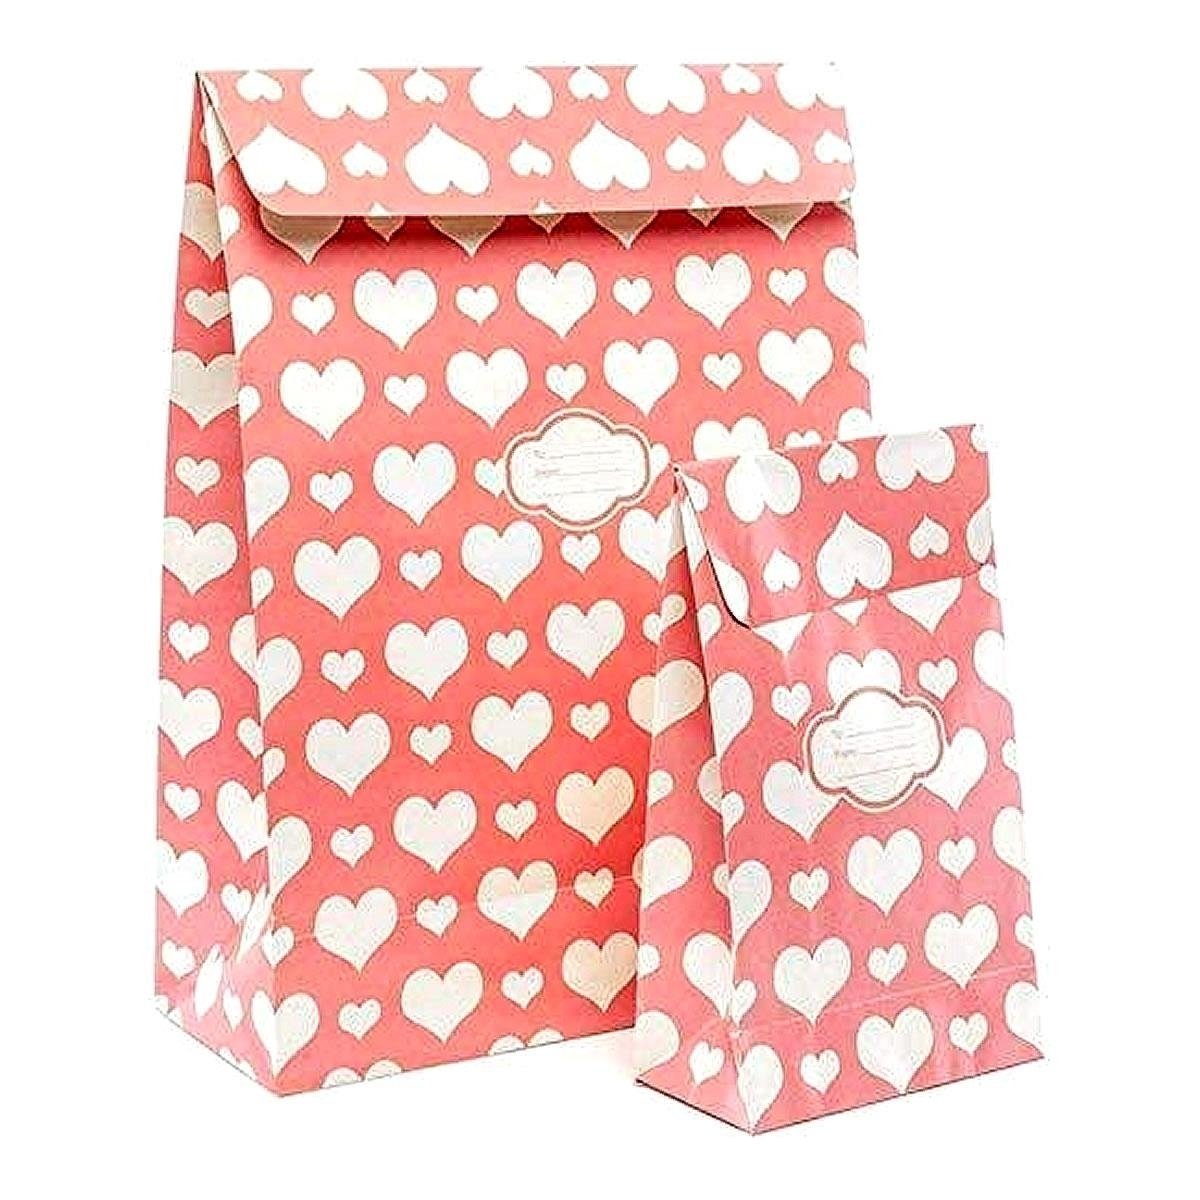 Pressie Pouch Peel & Seal Gift Bag Pink Hearts 12pk Small No-Wrap Present